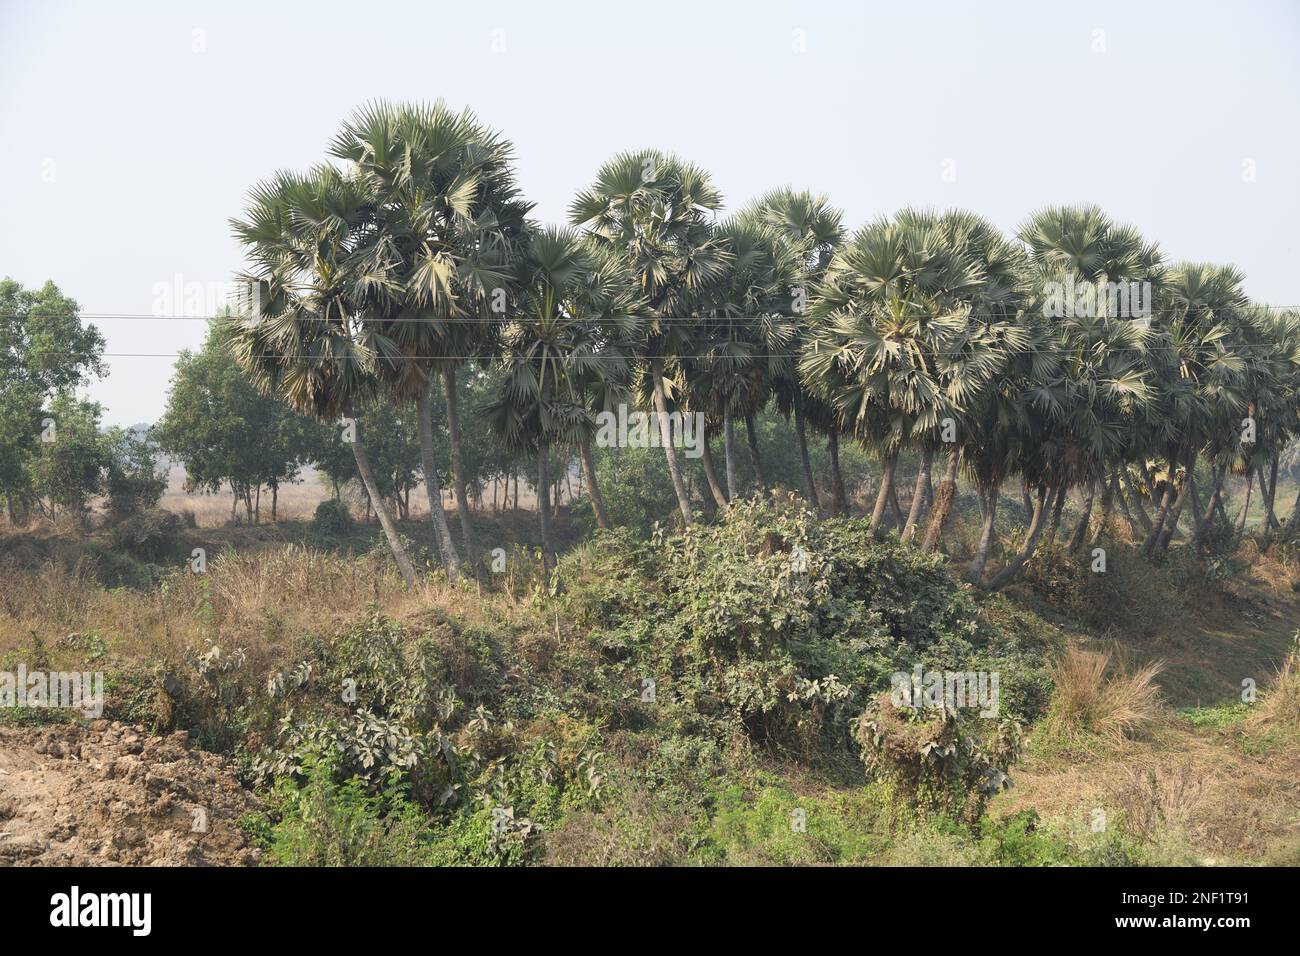 Palm trees near the Tata Nano controversy land at Singur, Hooghly, West Bengal, India. Stock Photo